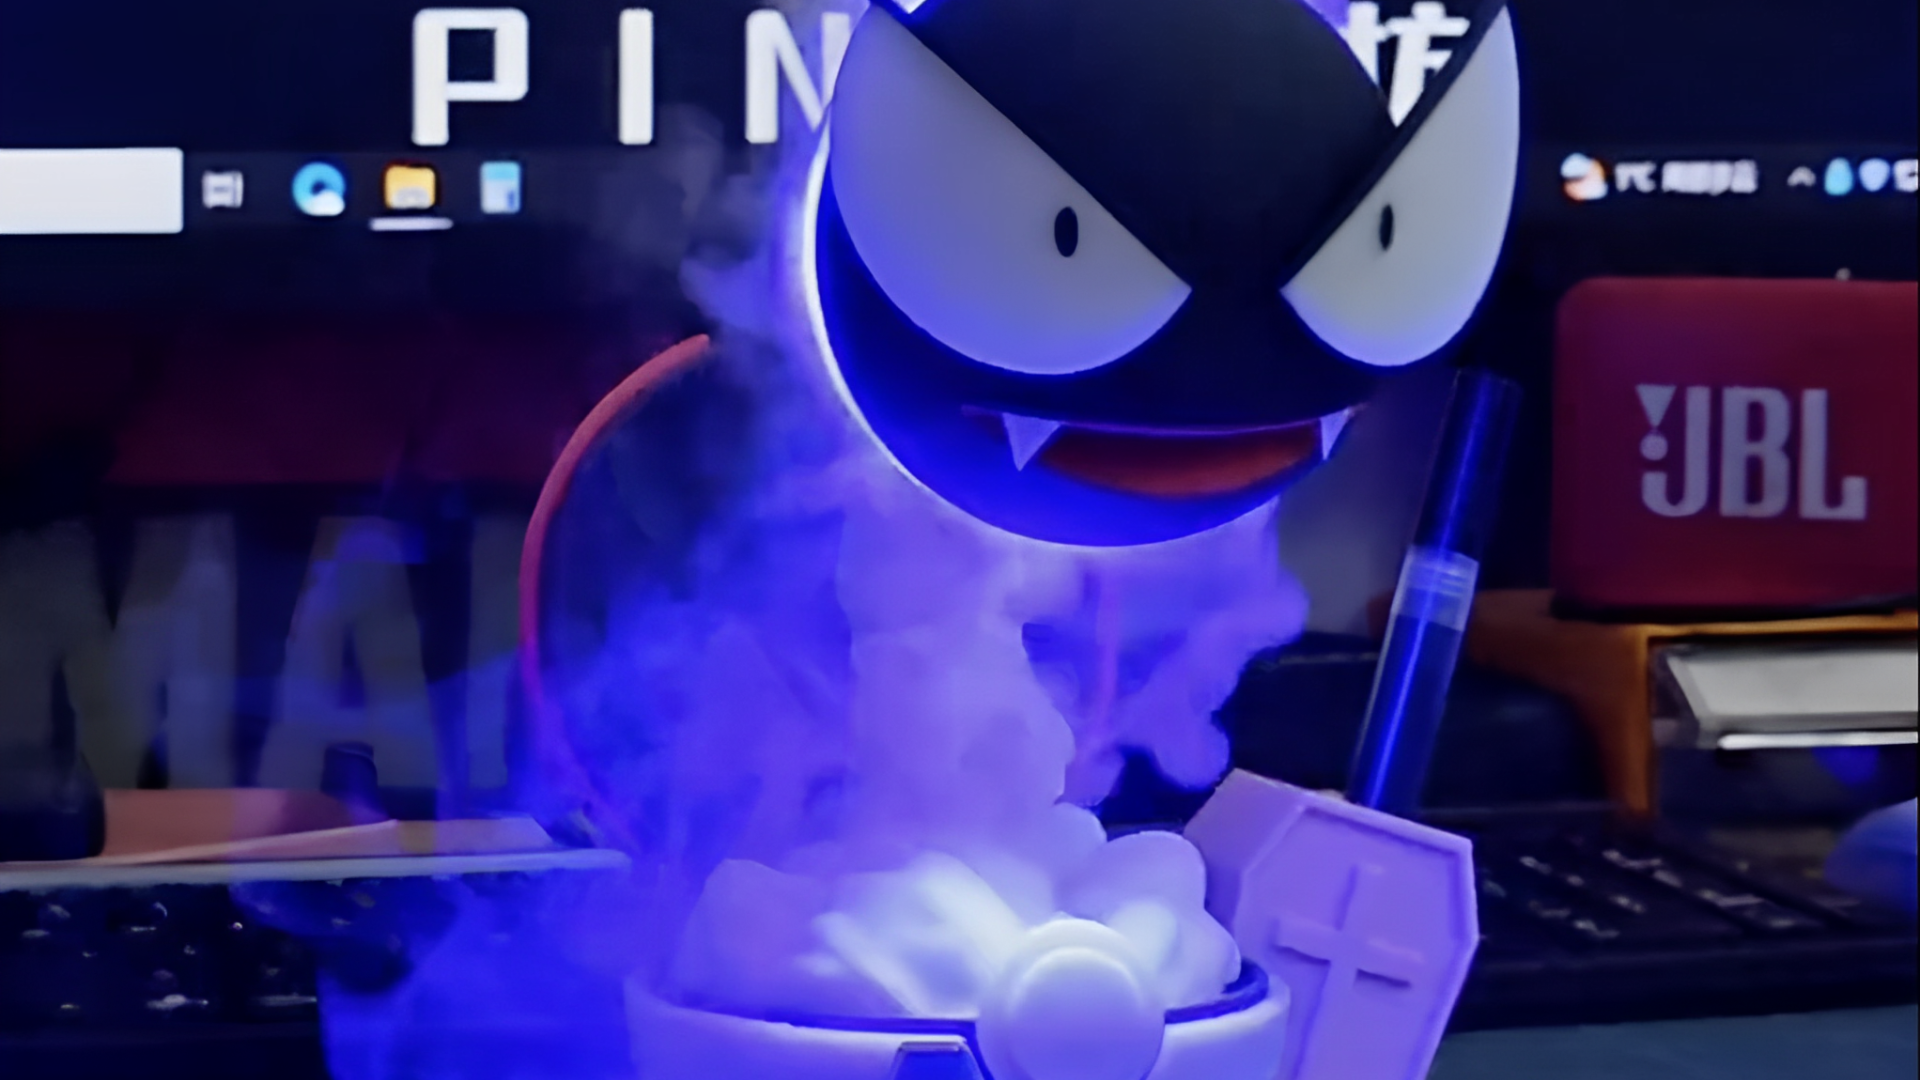 New Gastly Humidifier - 3D printed luminous Pokémon humidifier with advanced mist emission, UV disinfection, and blue purple ambient night light glow.